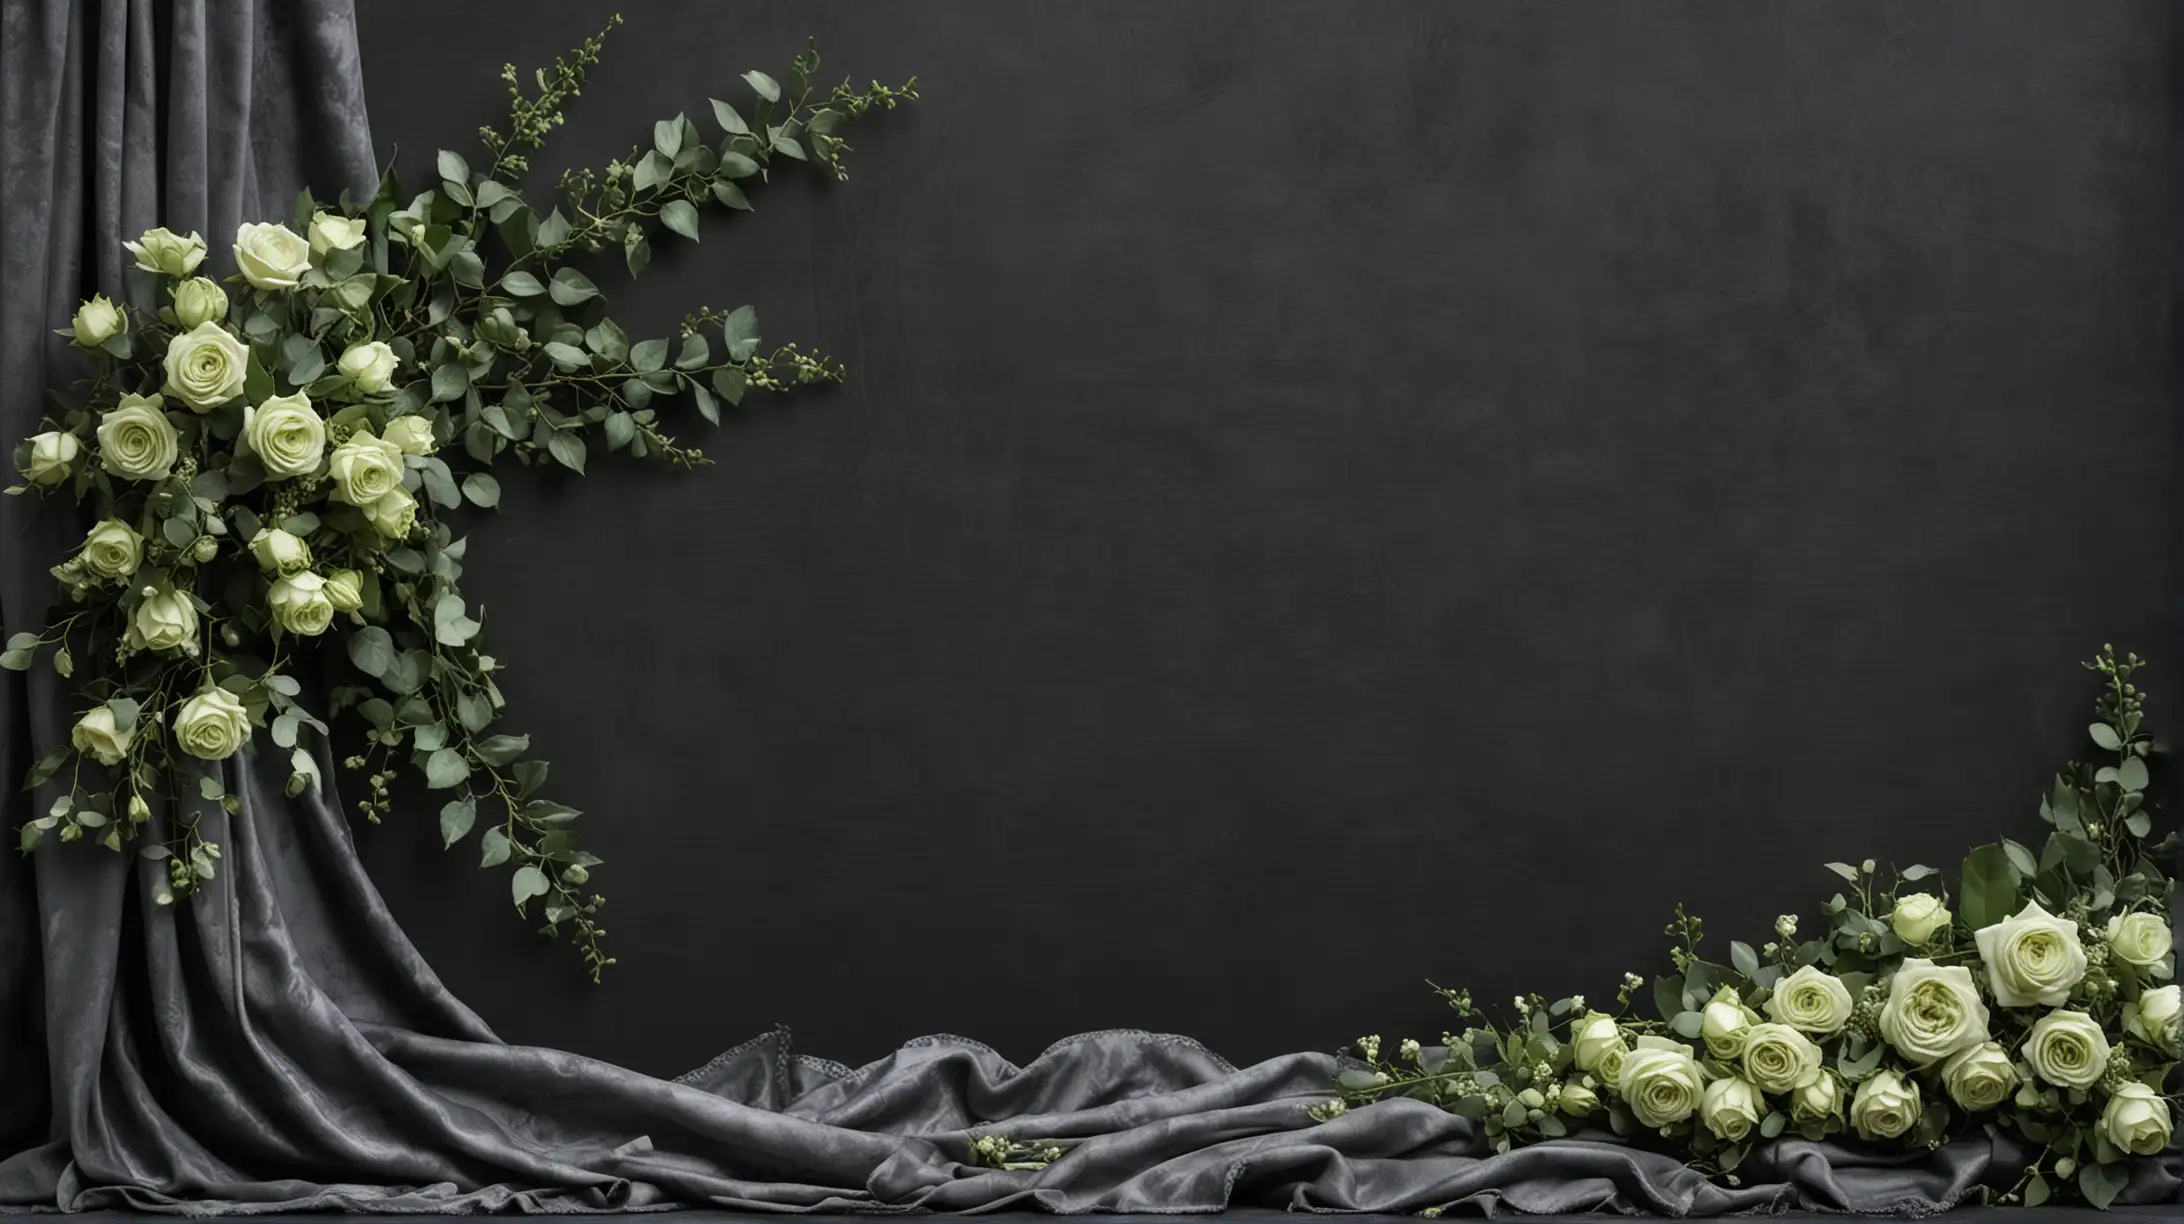 Elegant Floral Arrangement with Green Roses and Gypsophila on Draped Dark Gray Fabric